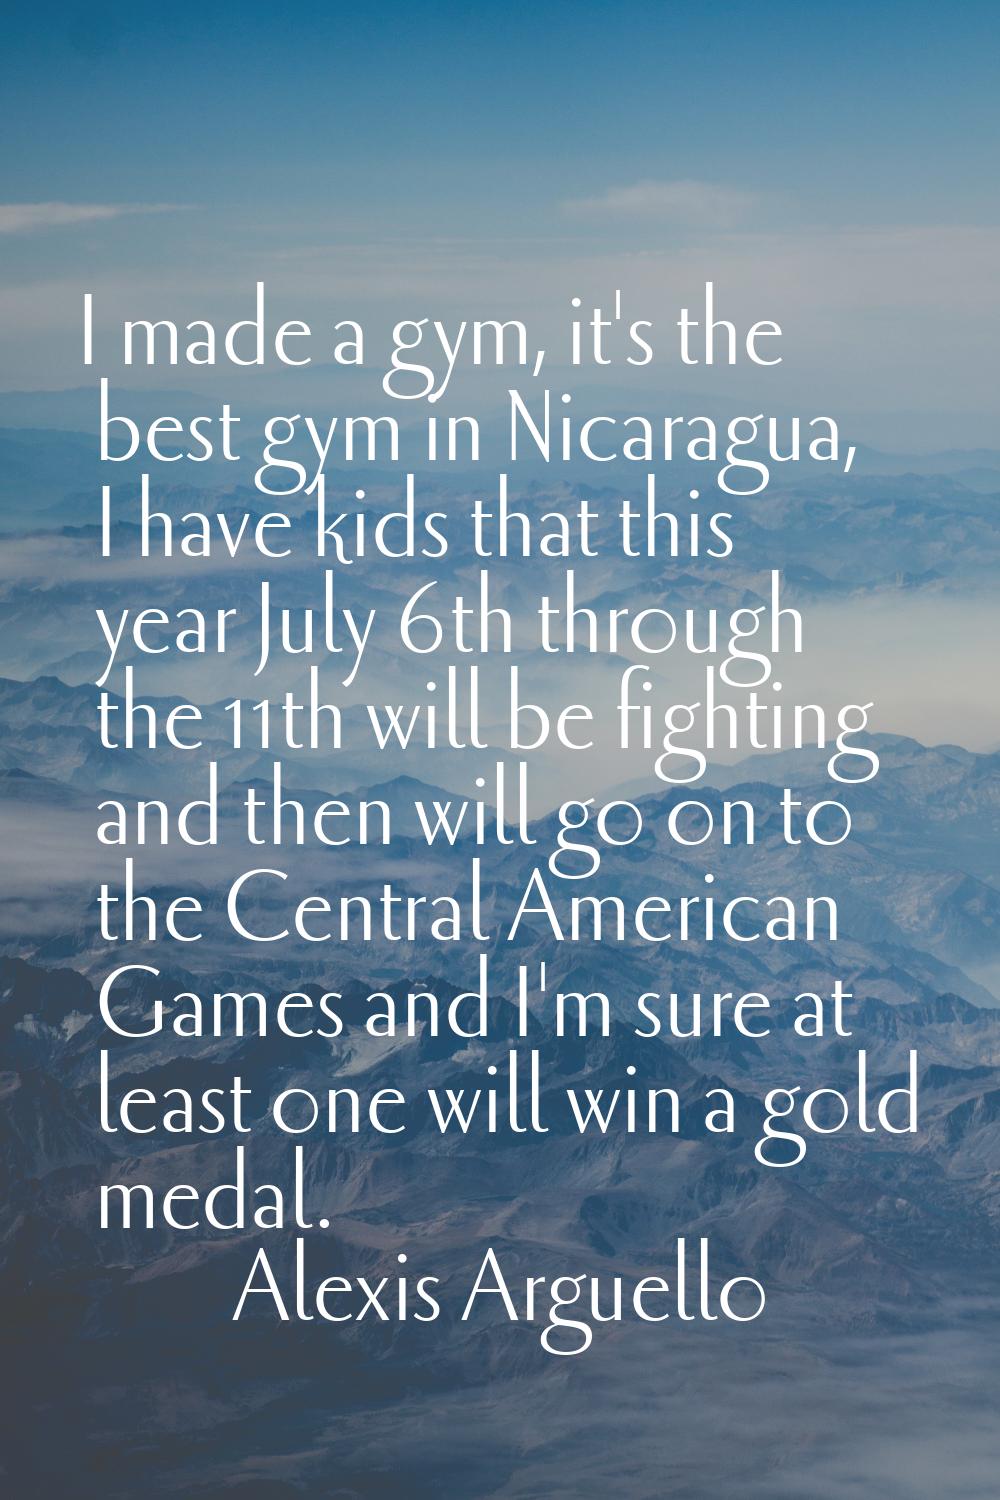 I made a gym, it's the best gym in Nicaragua, I have kids that this year July 6th through the 11th 